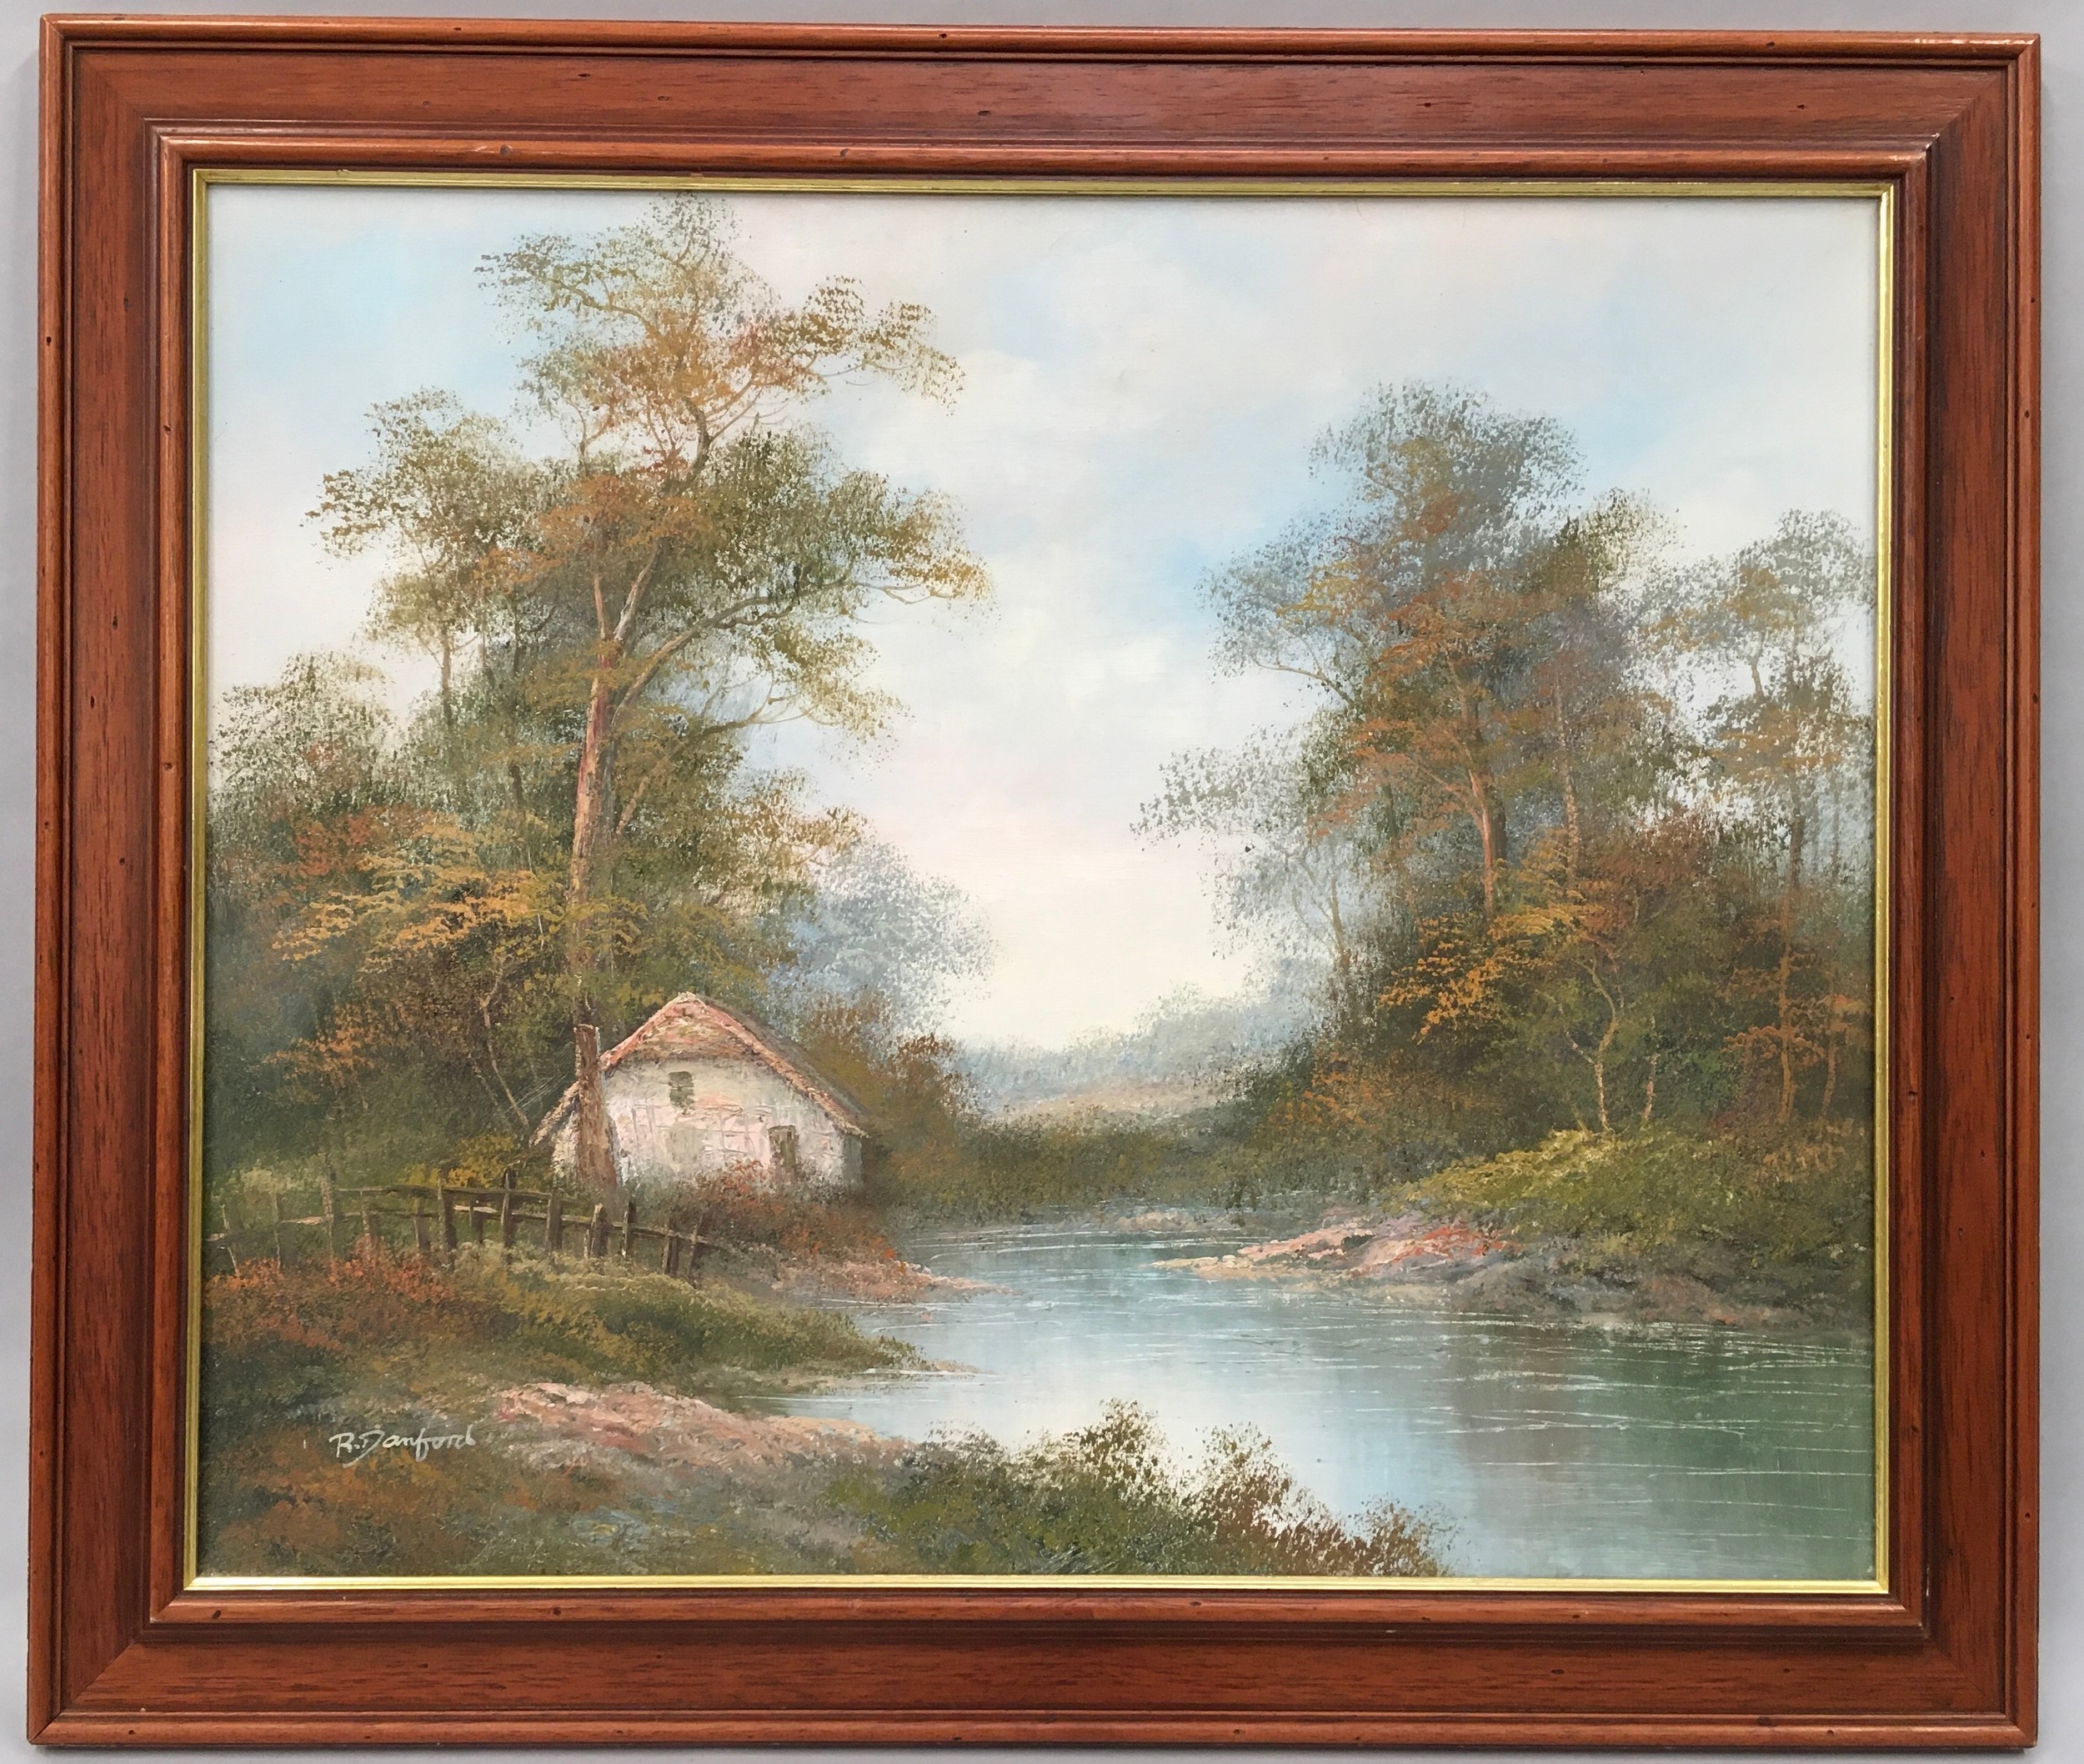 R. Danford art oil on canvas depicting a country cottage aside a river signed bottom left 75x63cm